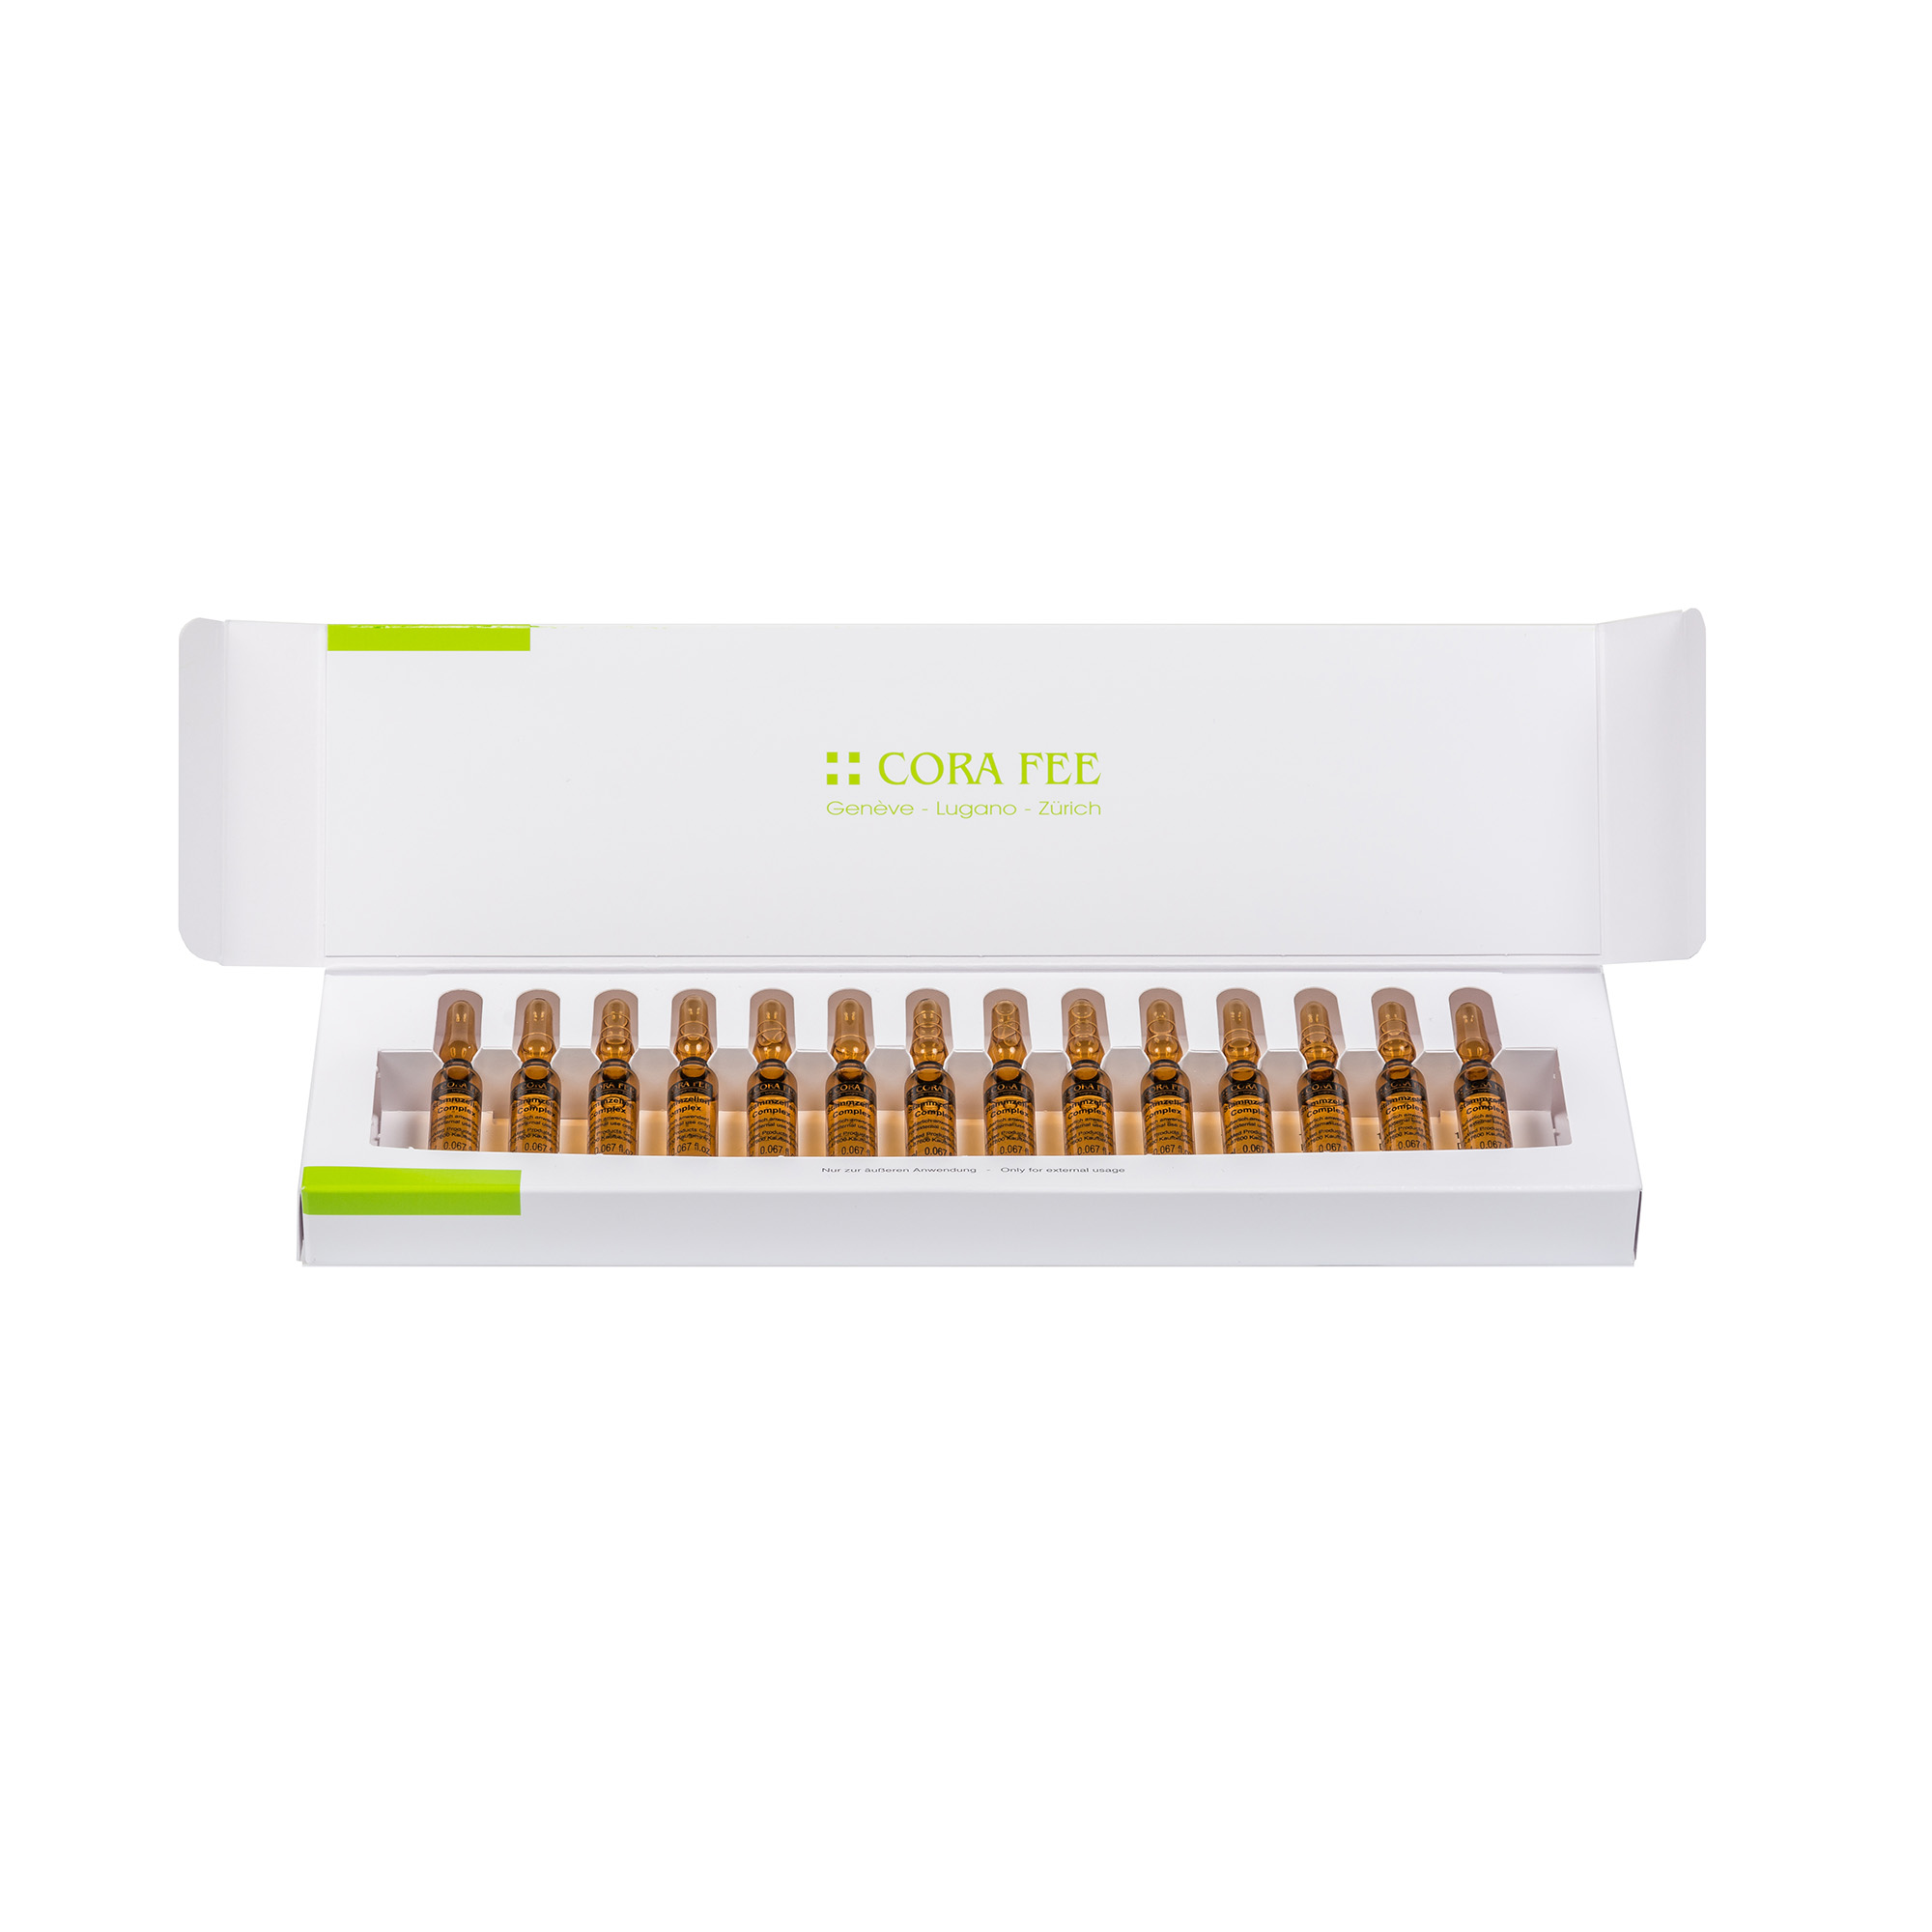 Cora Fee Phyto Stem Cell Ampoules, 14 x 2ml